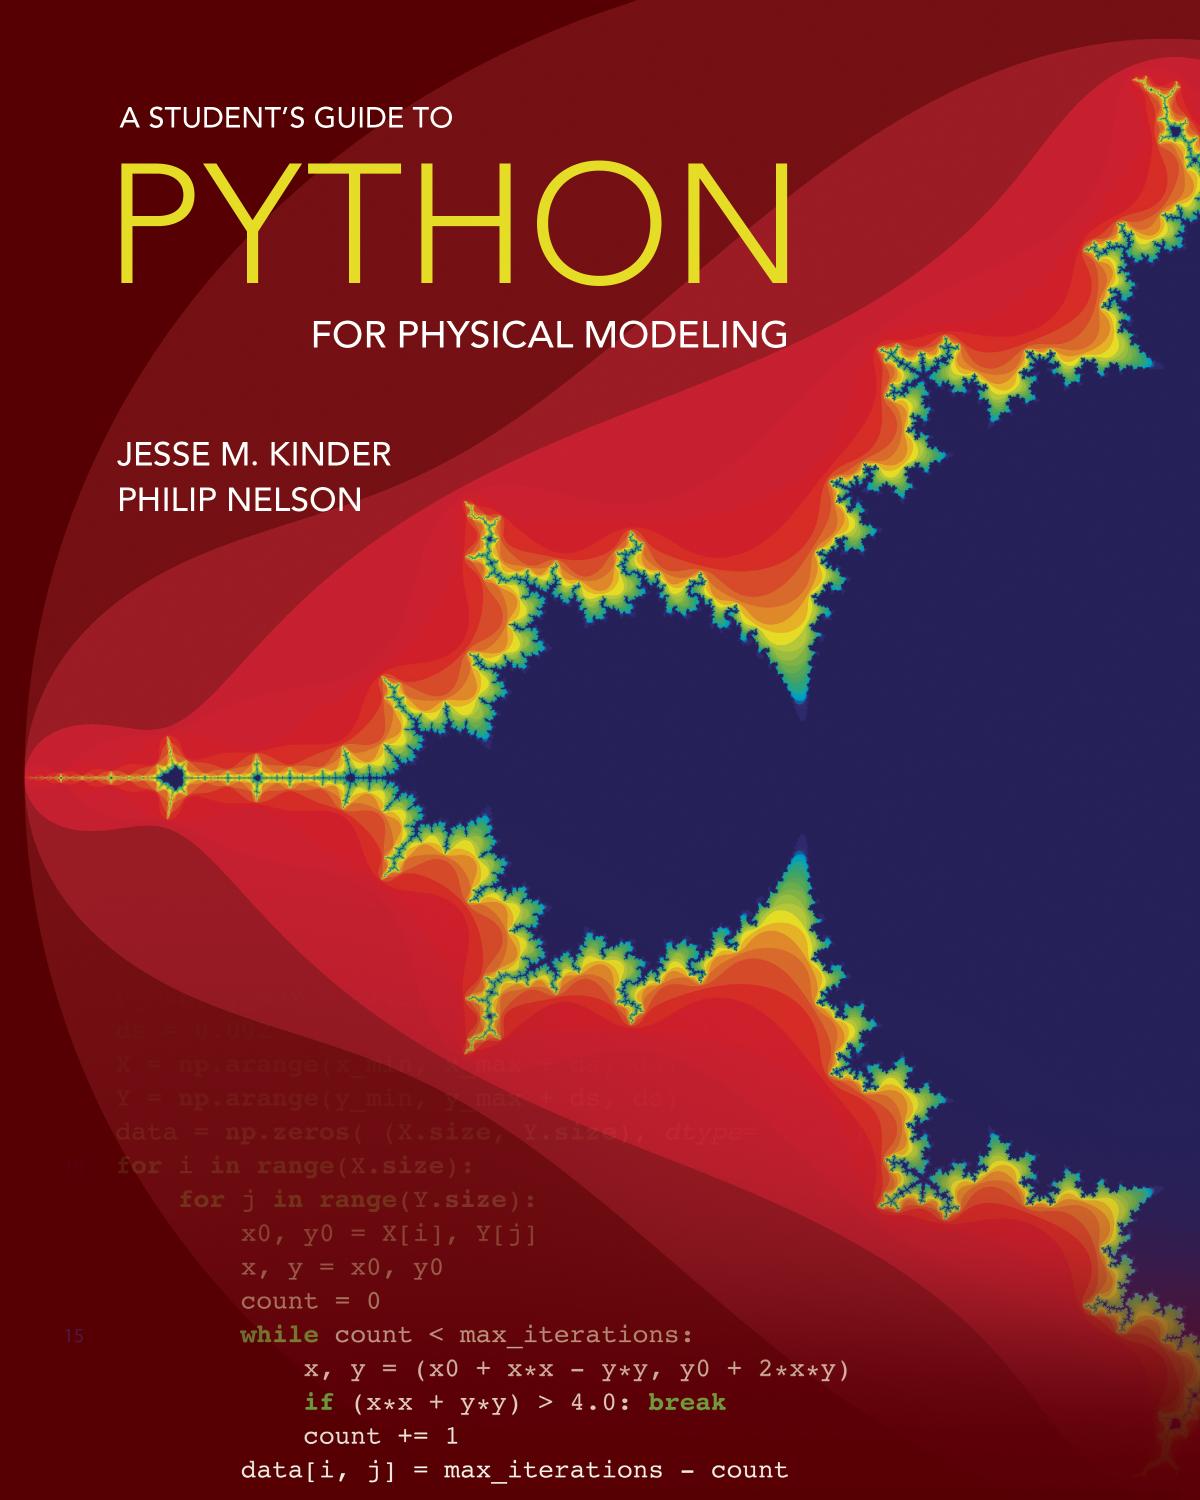 Student's Python Guide by Jesse M. Kinder and Philip Nelson